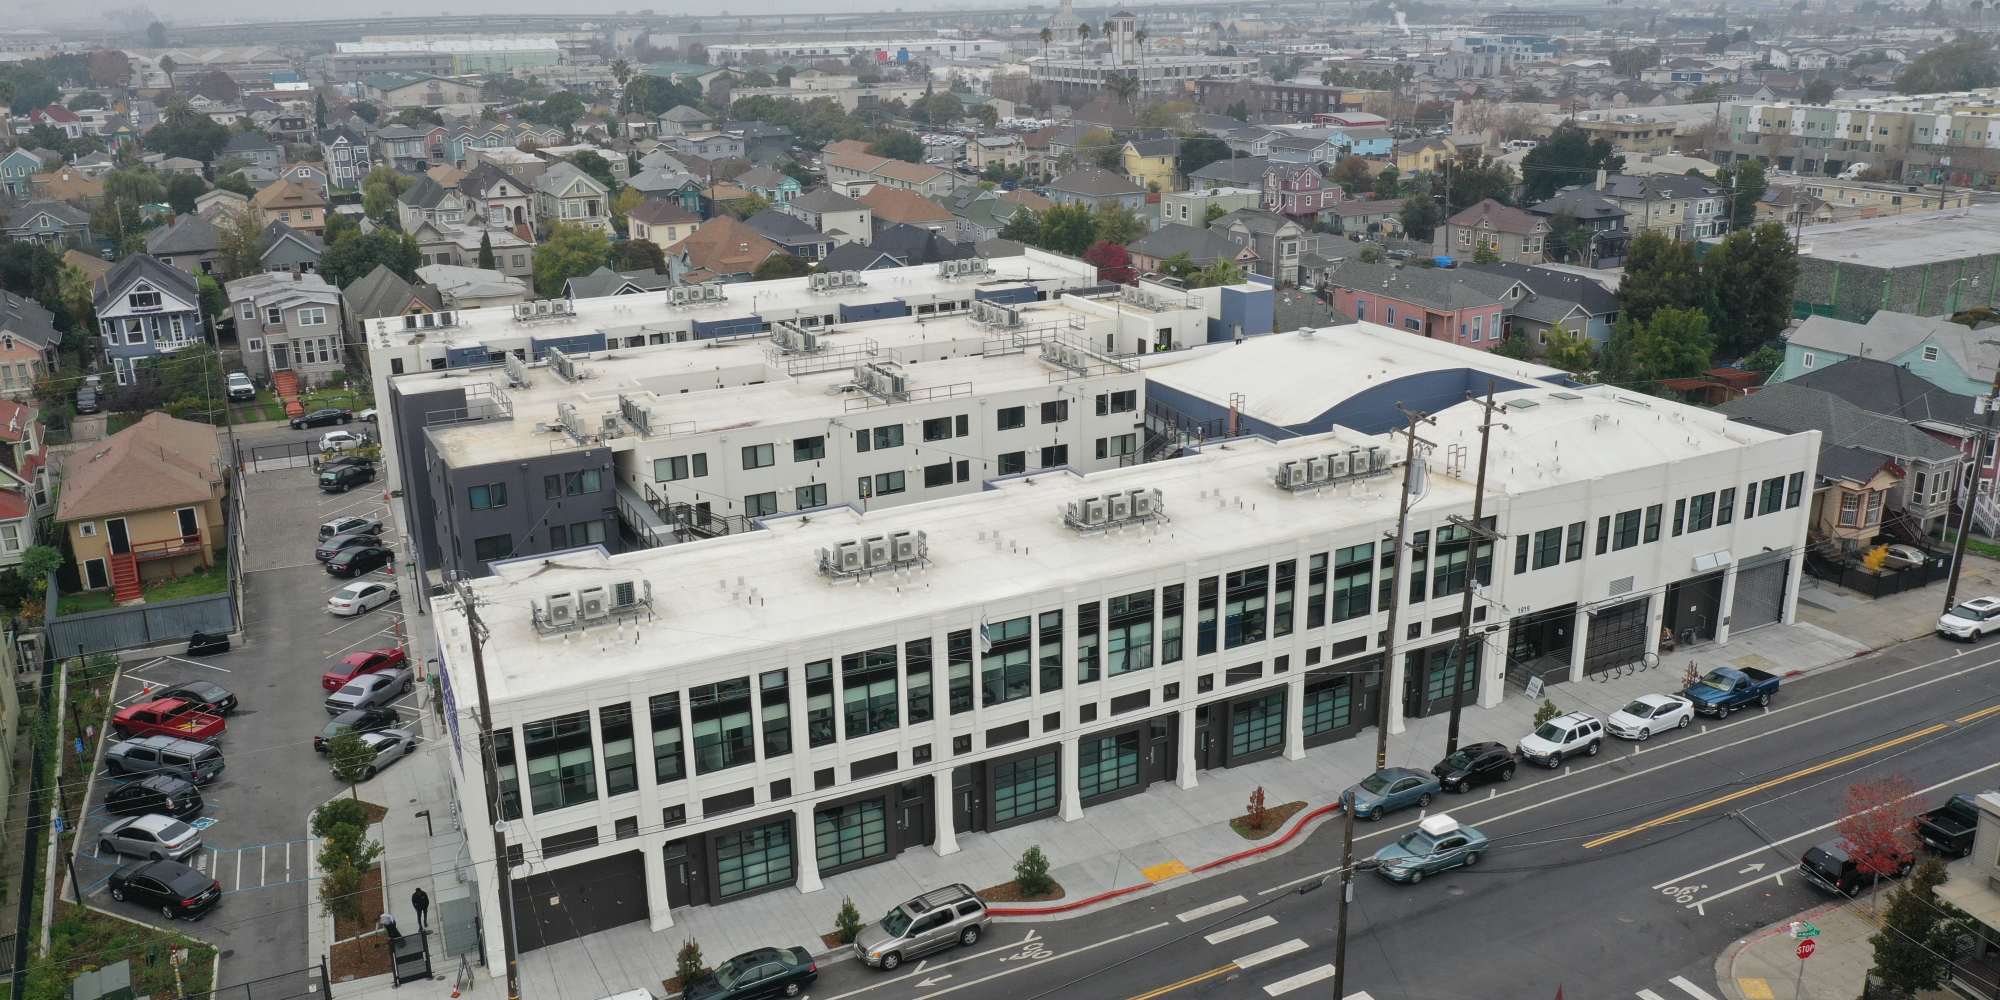 View of the building from above at 1919 Market Street in Oakland, California